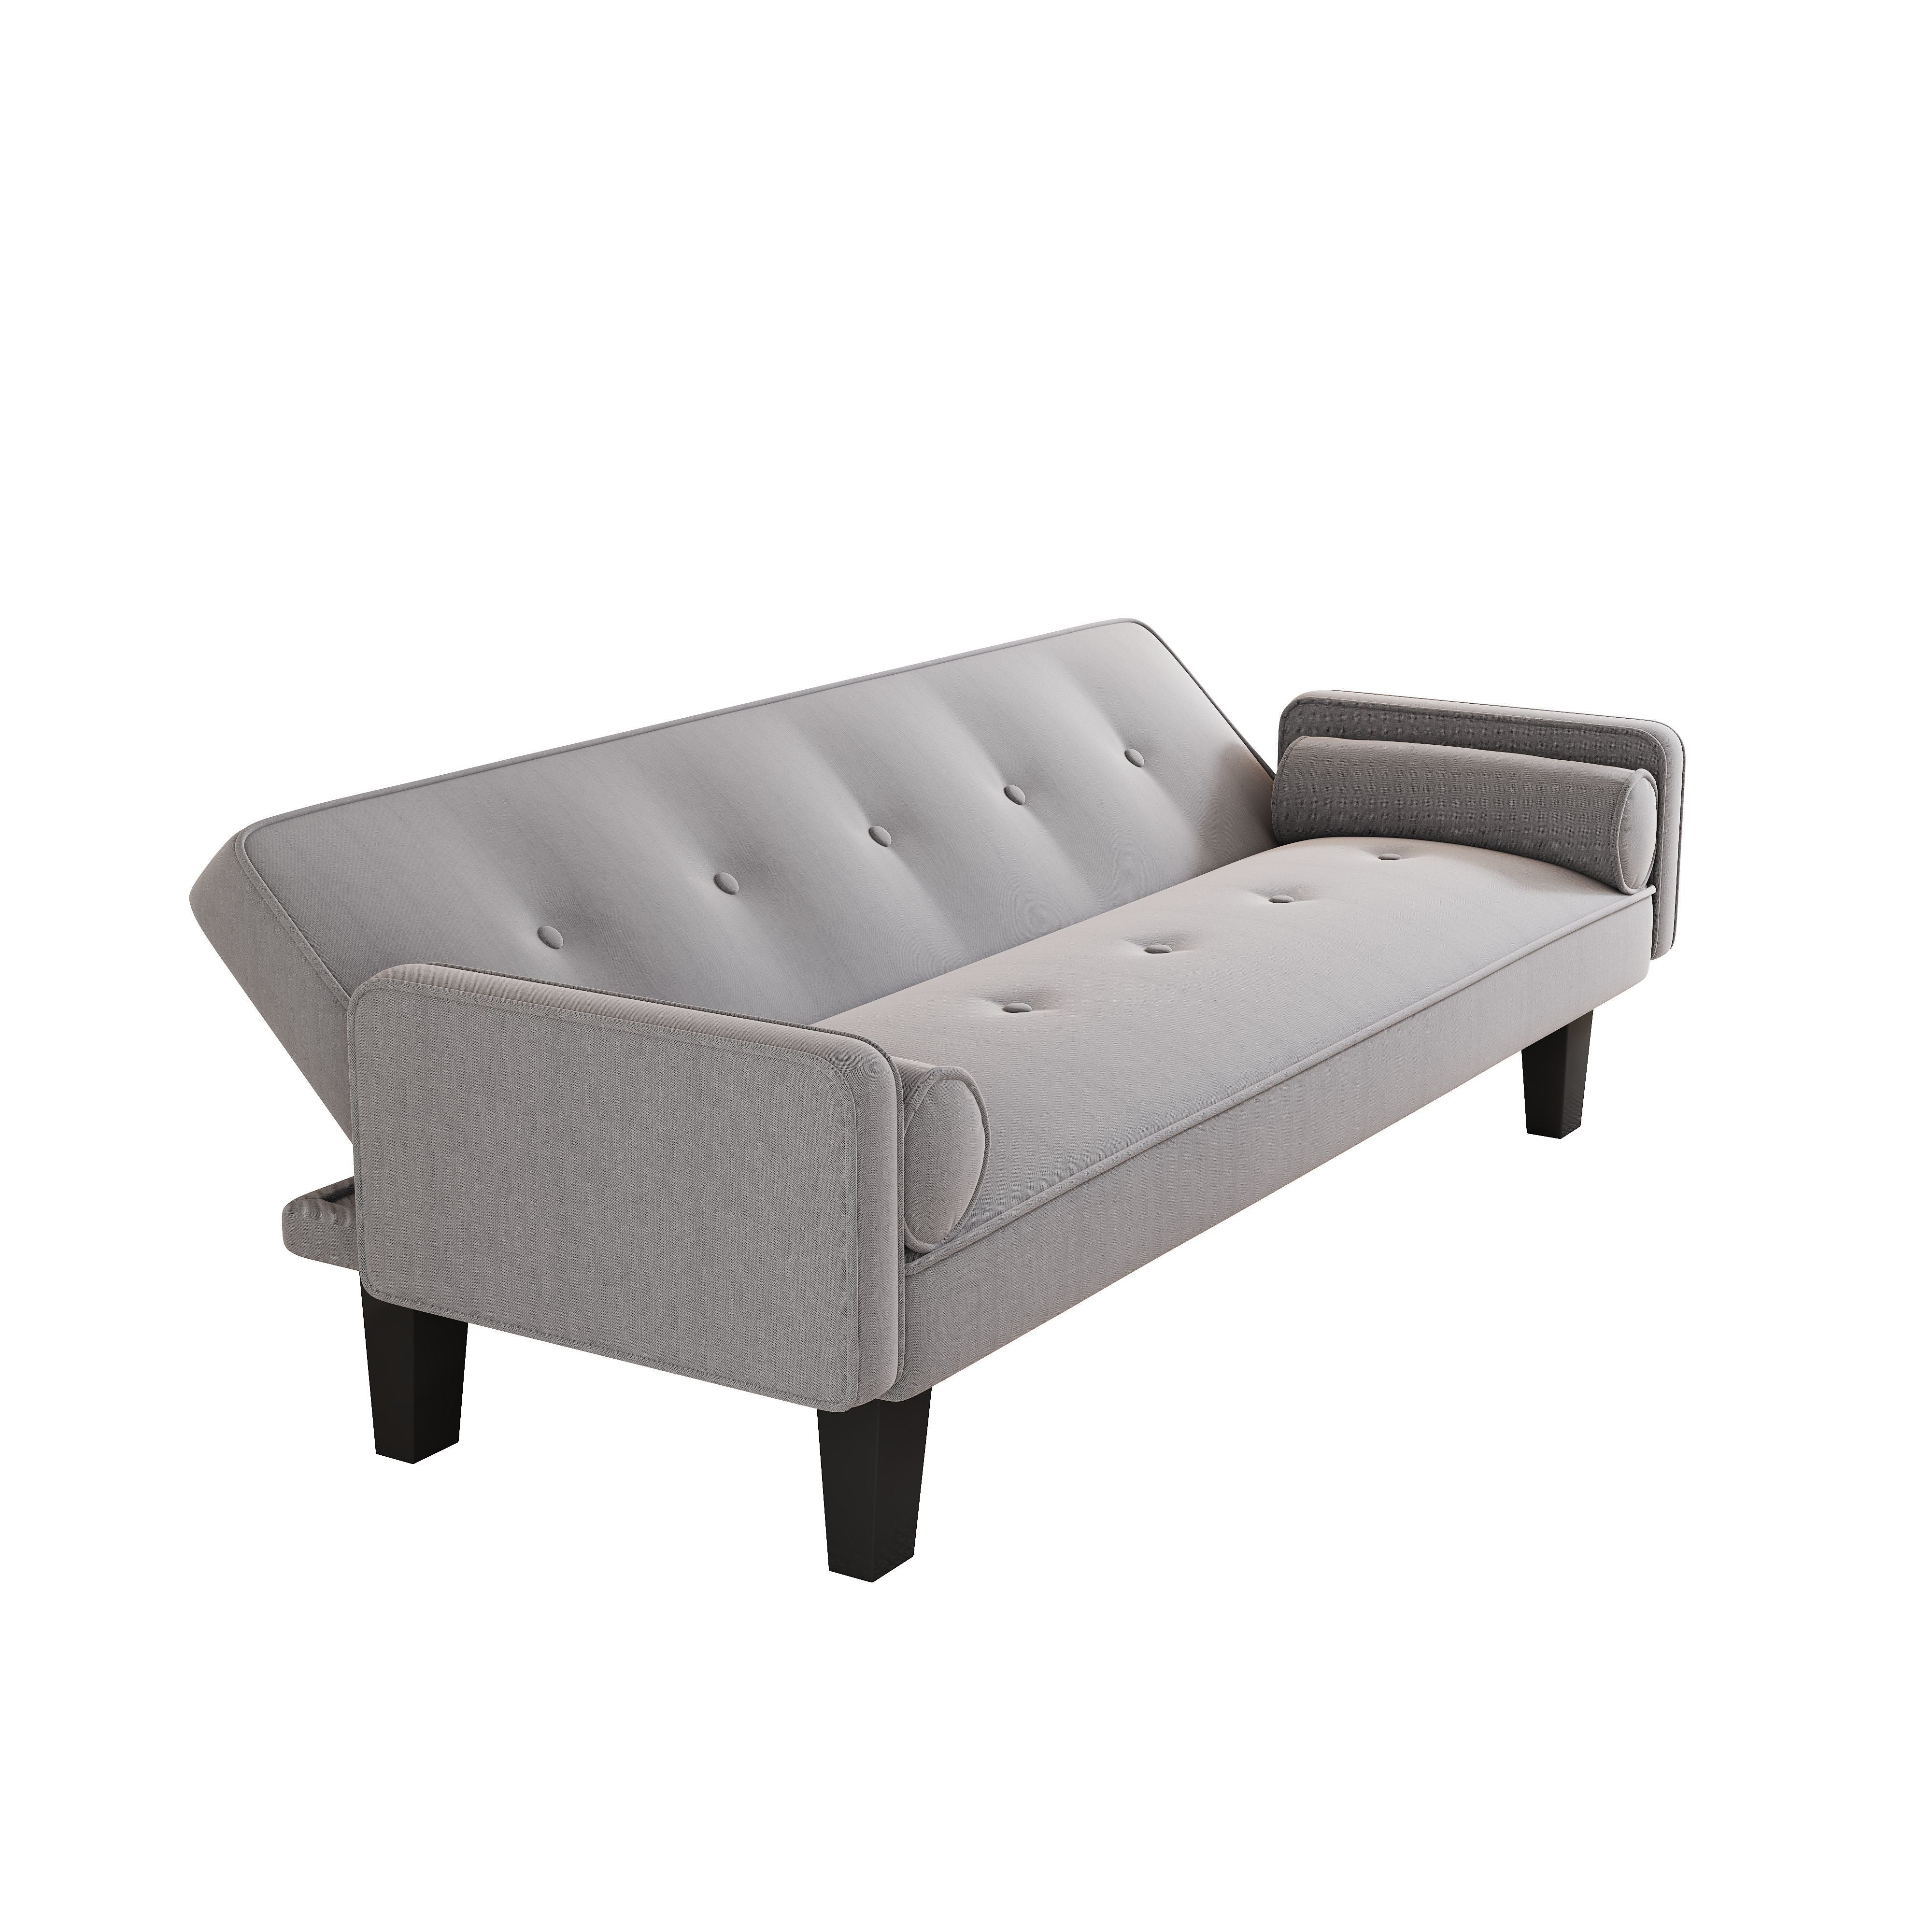 The Sofa Can Be Converted Into A Sofa Bed, Including Two Pillows, 72 "Light Grey Cotton Linen Sofa Bed Suitable For Family Living Rooms